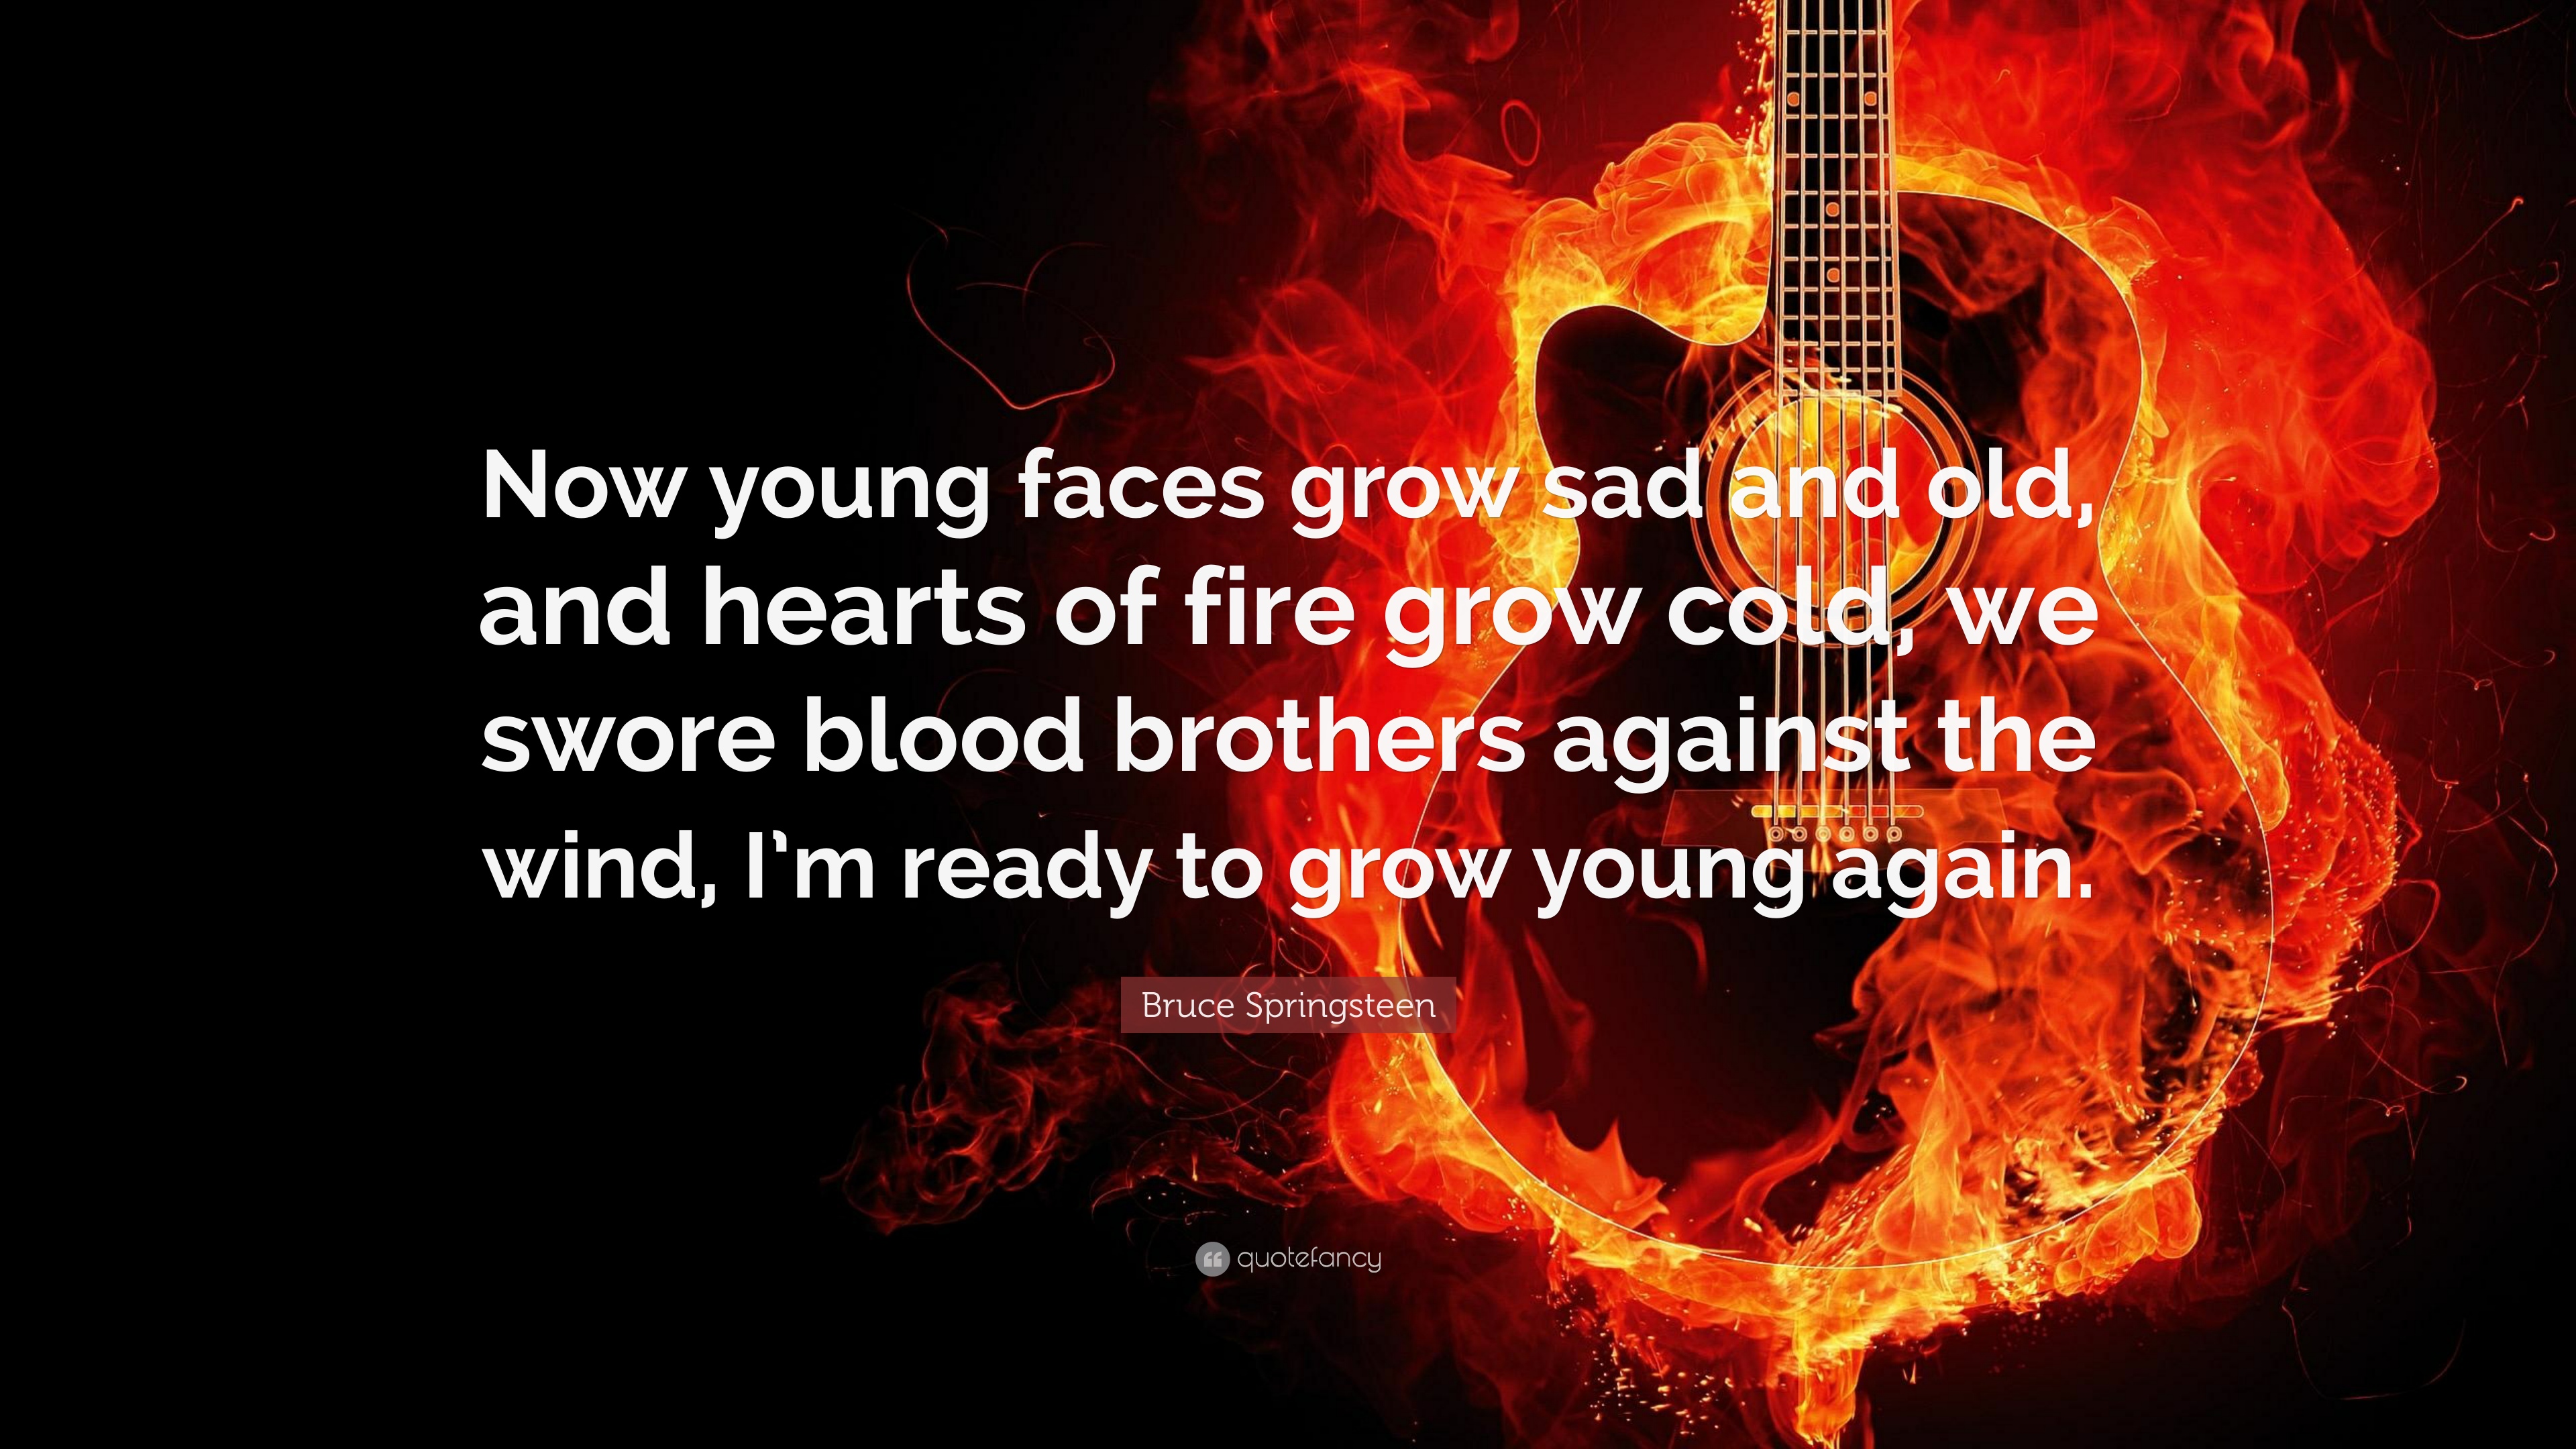 Bruce Springsteen Quote: “Now young faces grow sad and old